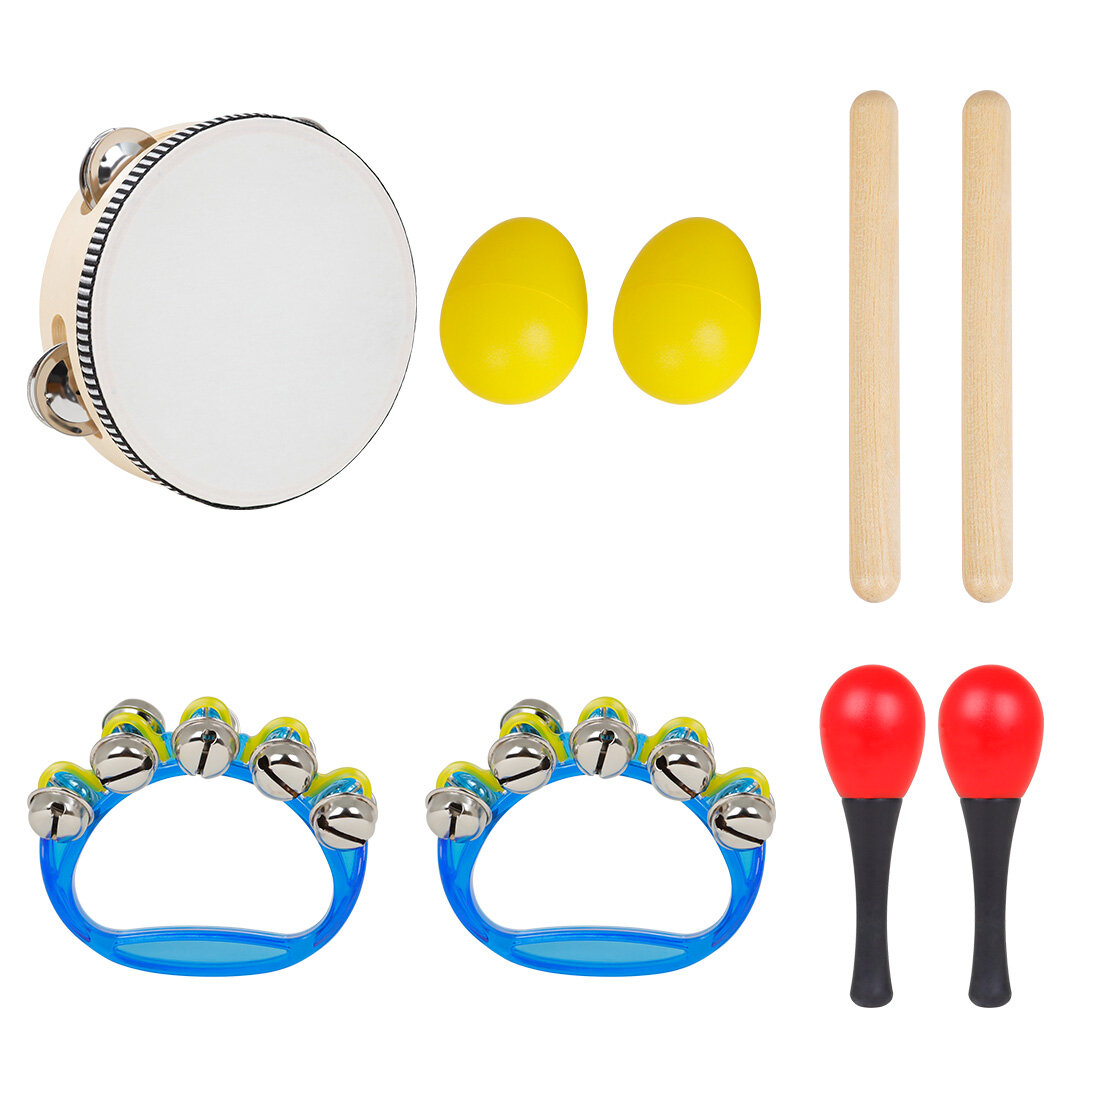 

SY-71 Orff Musical Instrument 5 Set with Tambourine Sand Egg Sand Hammer Rhythm Stick Hand Bell